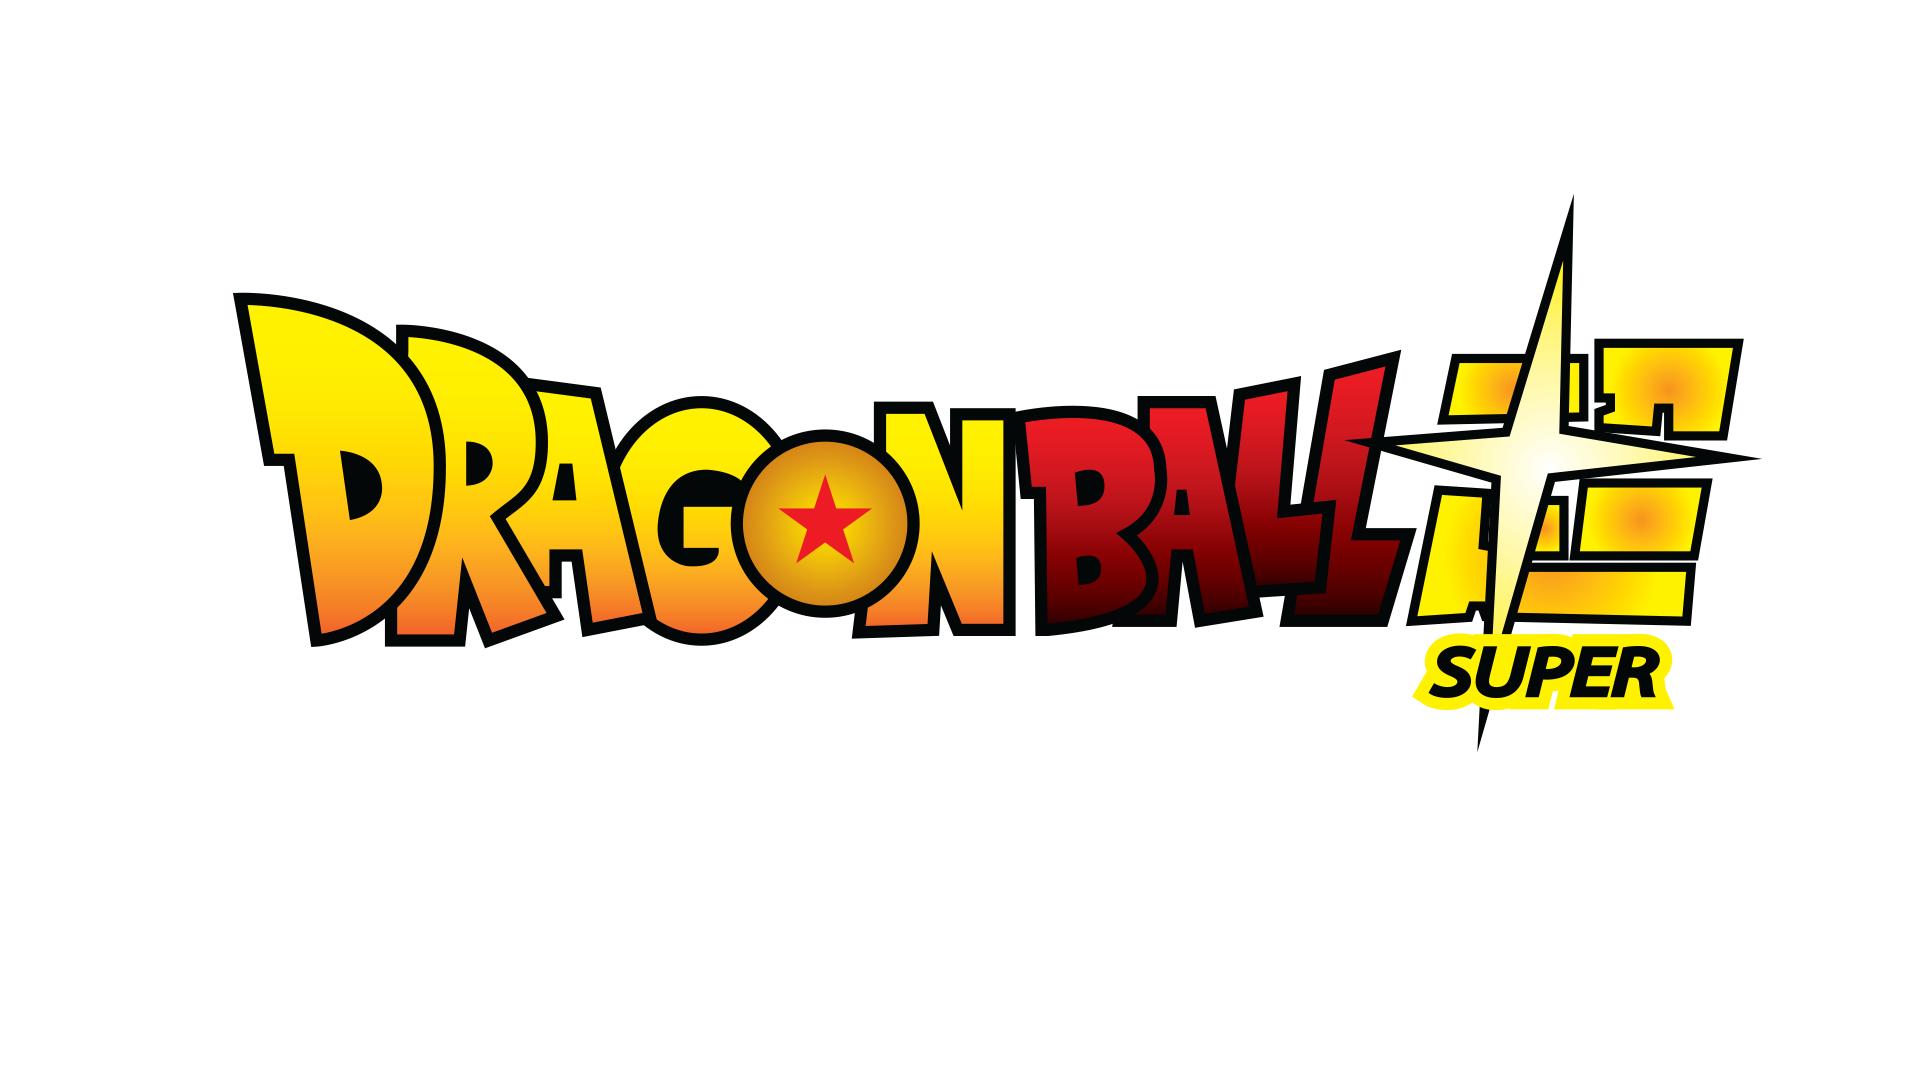 Dragon Bal Logo - I recreated the Dragon Ball Super logo in Illustrator to the best of ...